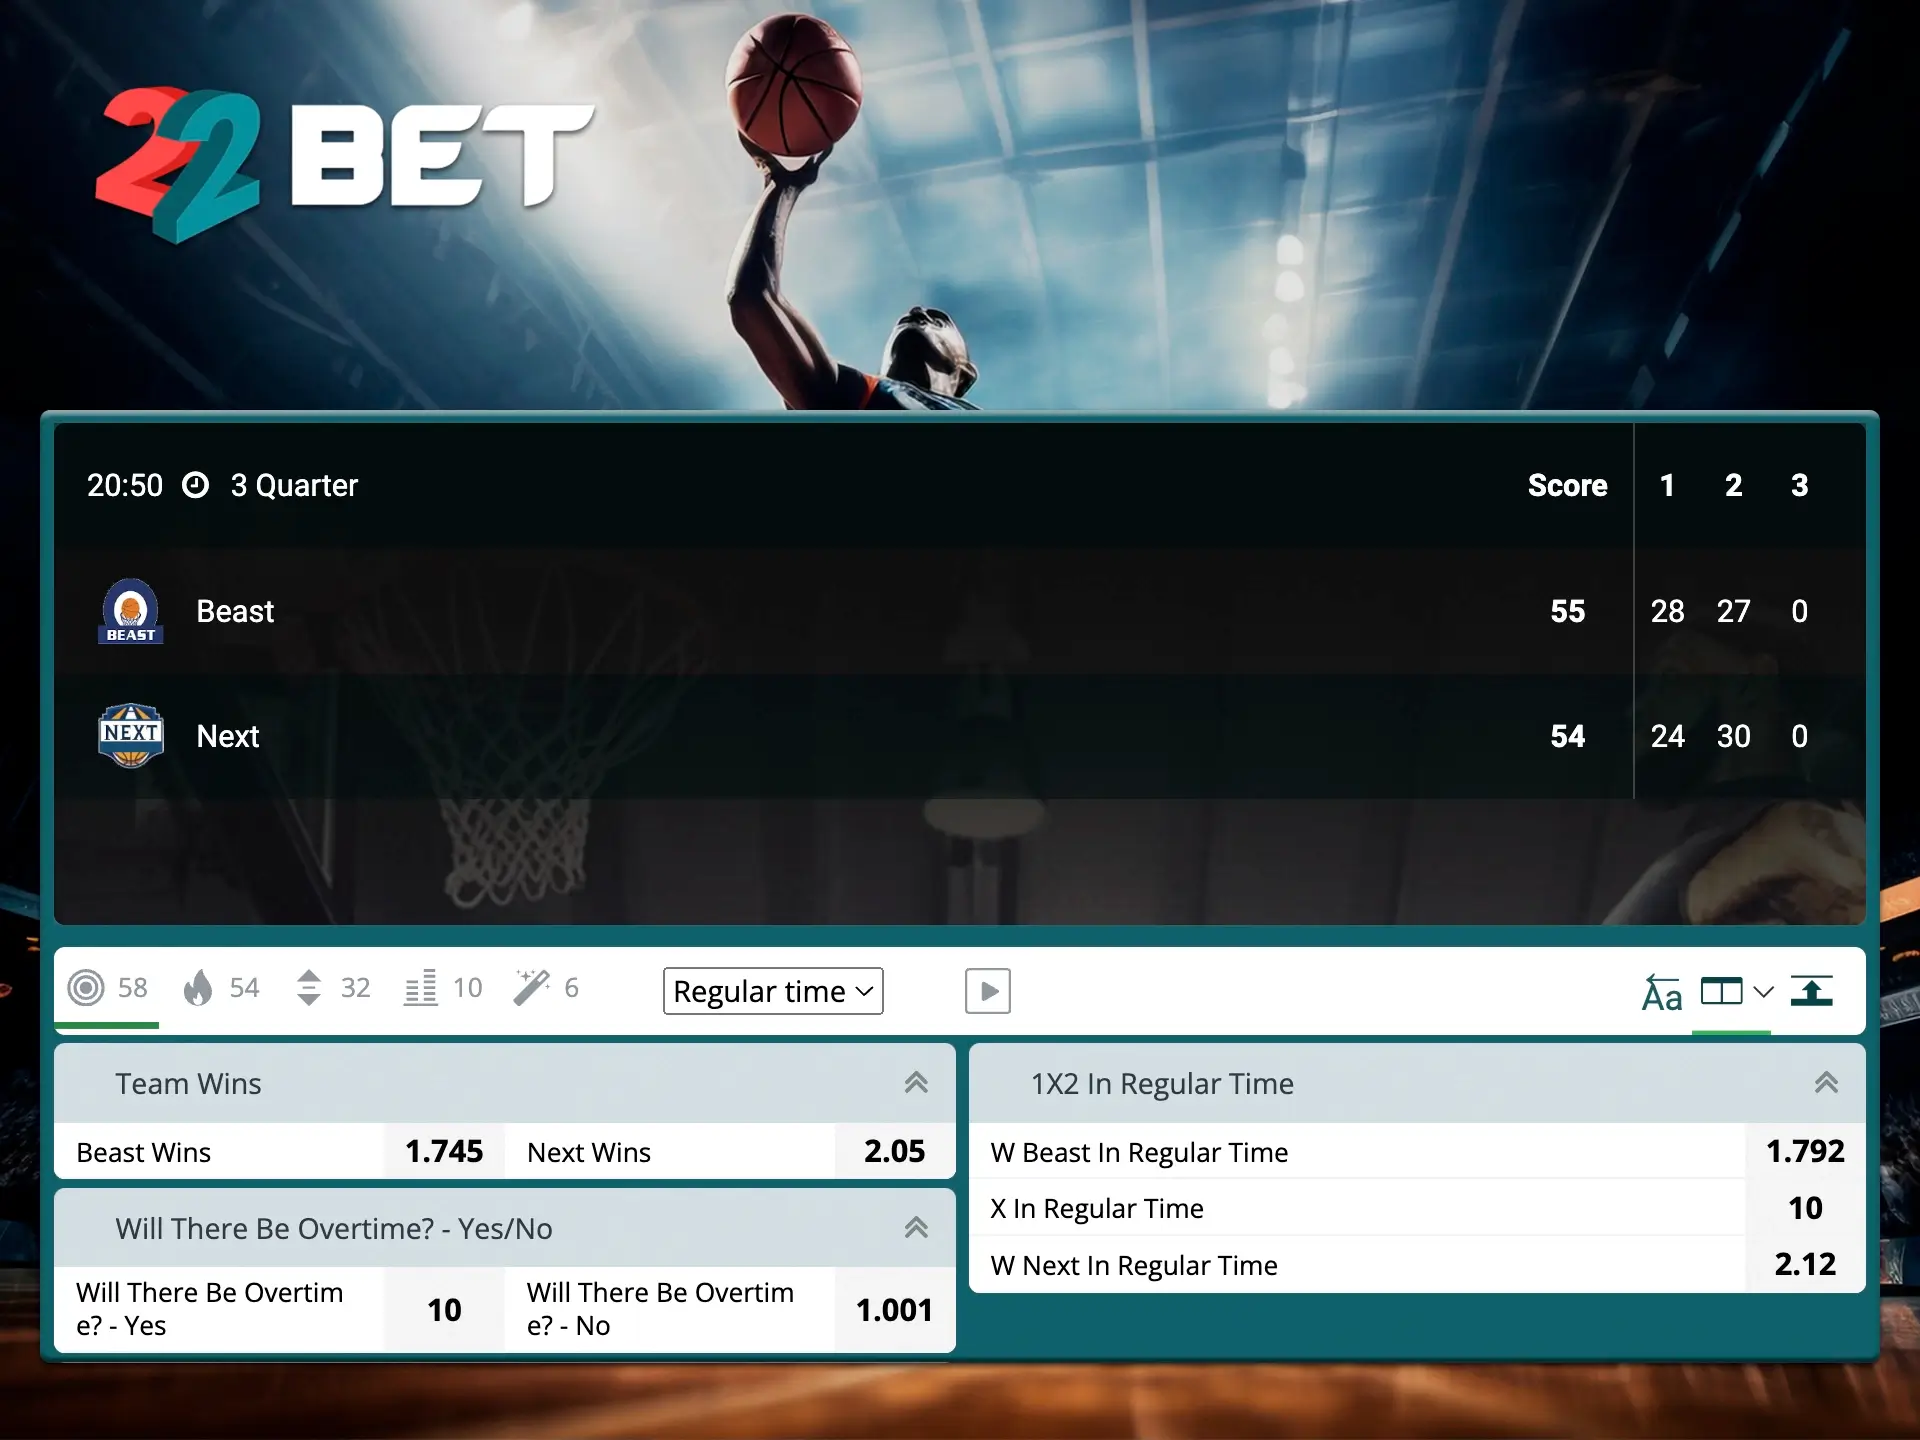 Make an instant registration at 22Bet and start betting on basketball.